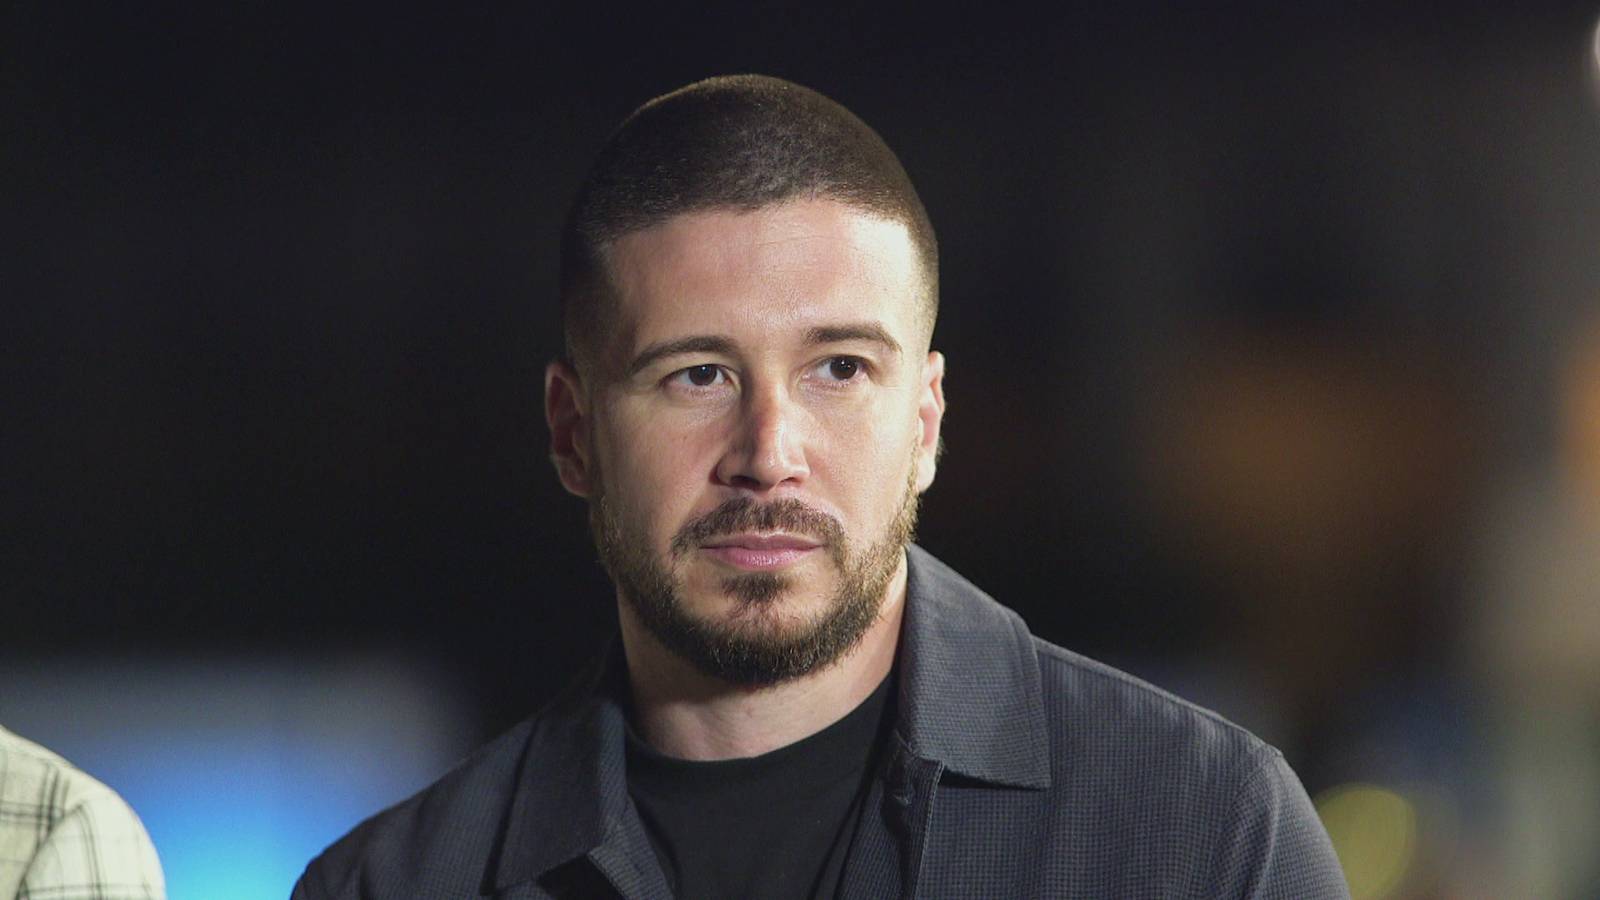 Vinny Guadagnino looks concerned in a screenshot from 'Double Shot at Love' on MTV